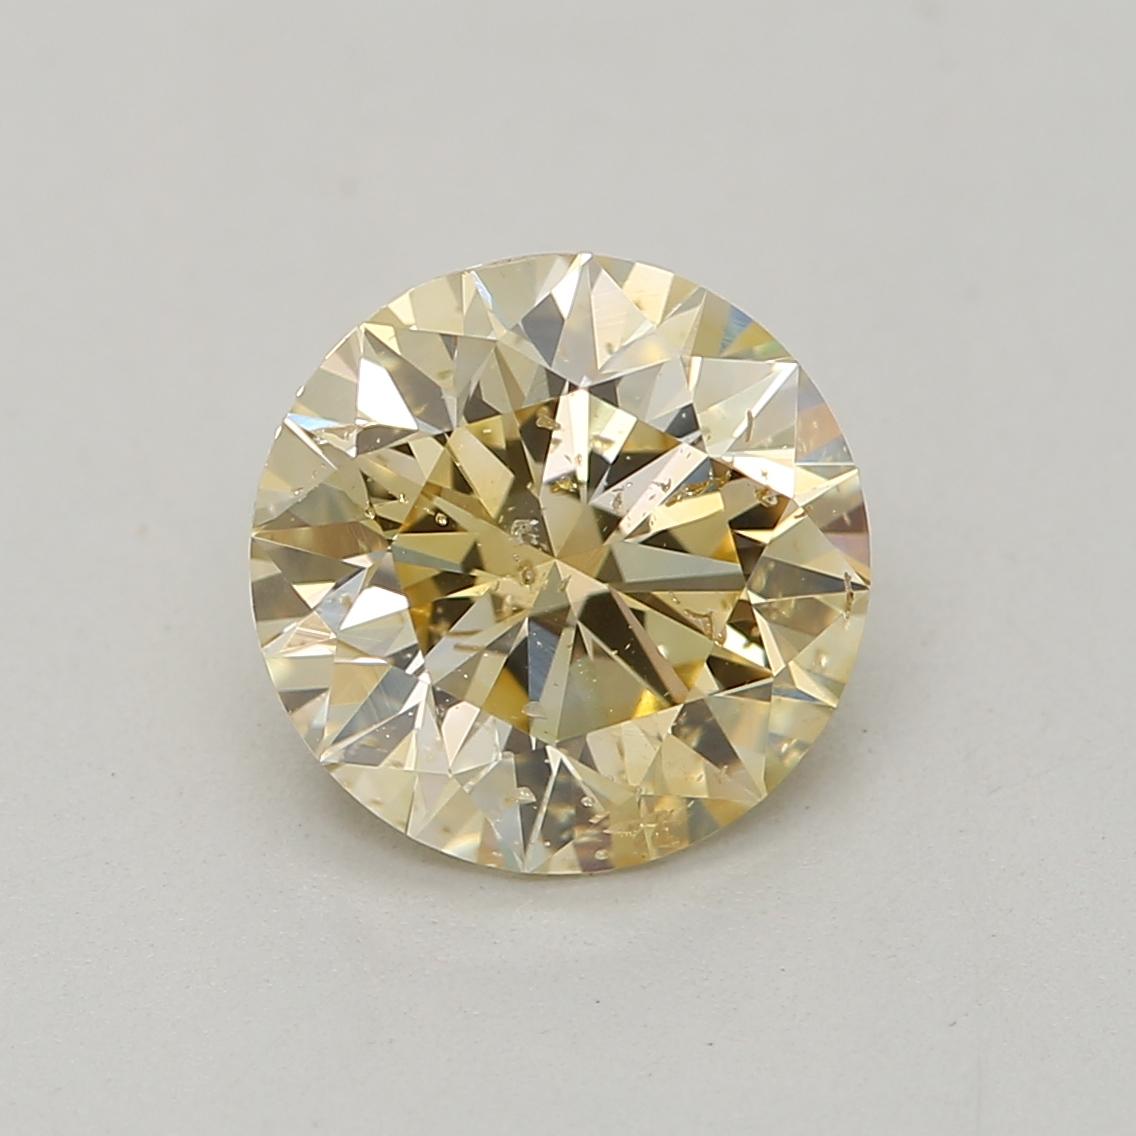 *100% NATURAL FANCY COLOUR DIAMOND*

✪ Diamond Details ✪

➛ Shape: Round
➛ Colour Grade: Fancy Brownish Yellow
➛ Carat: 1.01
➛ Clarity: I2
➛ GIA Certified 

^FEATURES OF THE DIAMOND^

Our 1.01 carat diamond refers to the weight of the diamond. It's